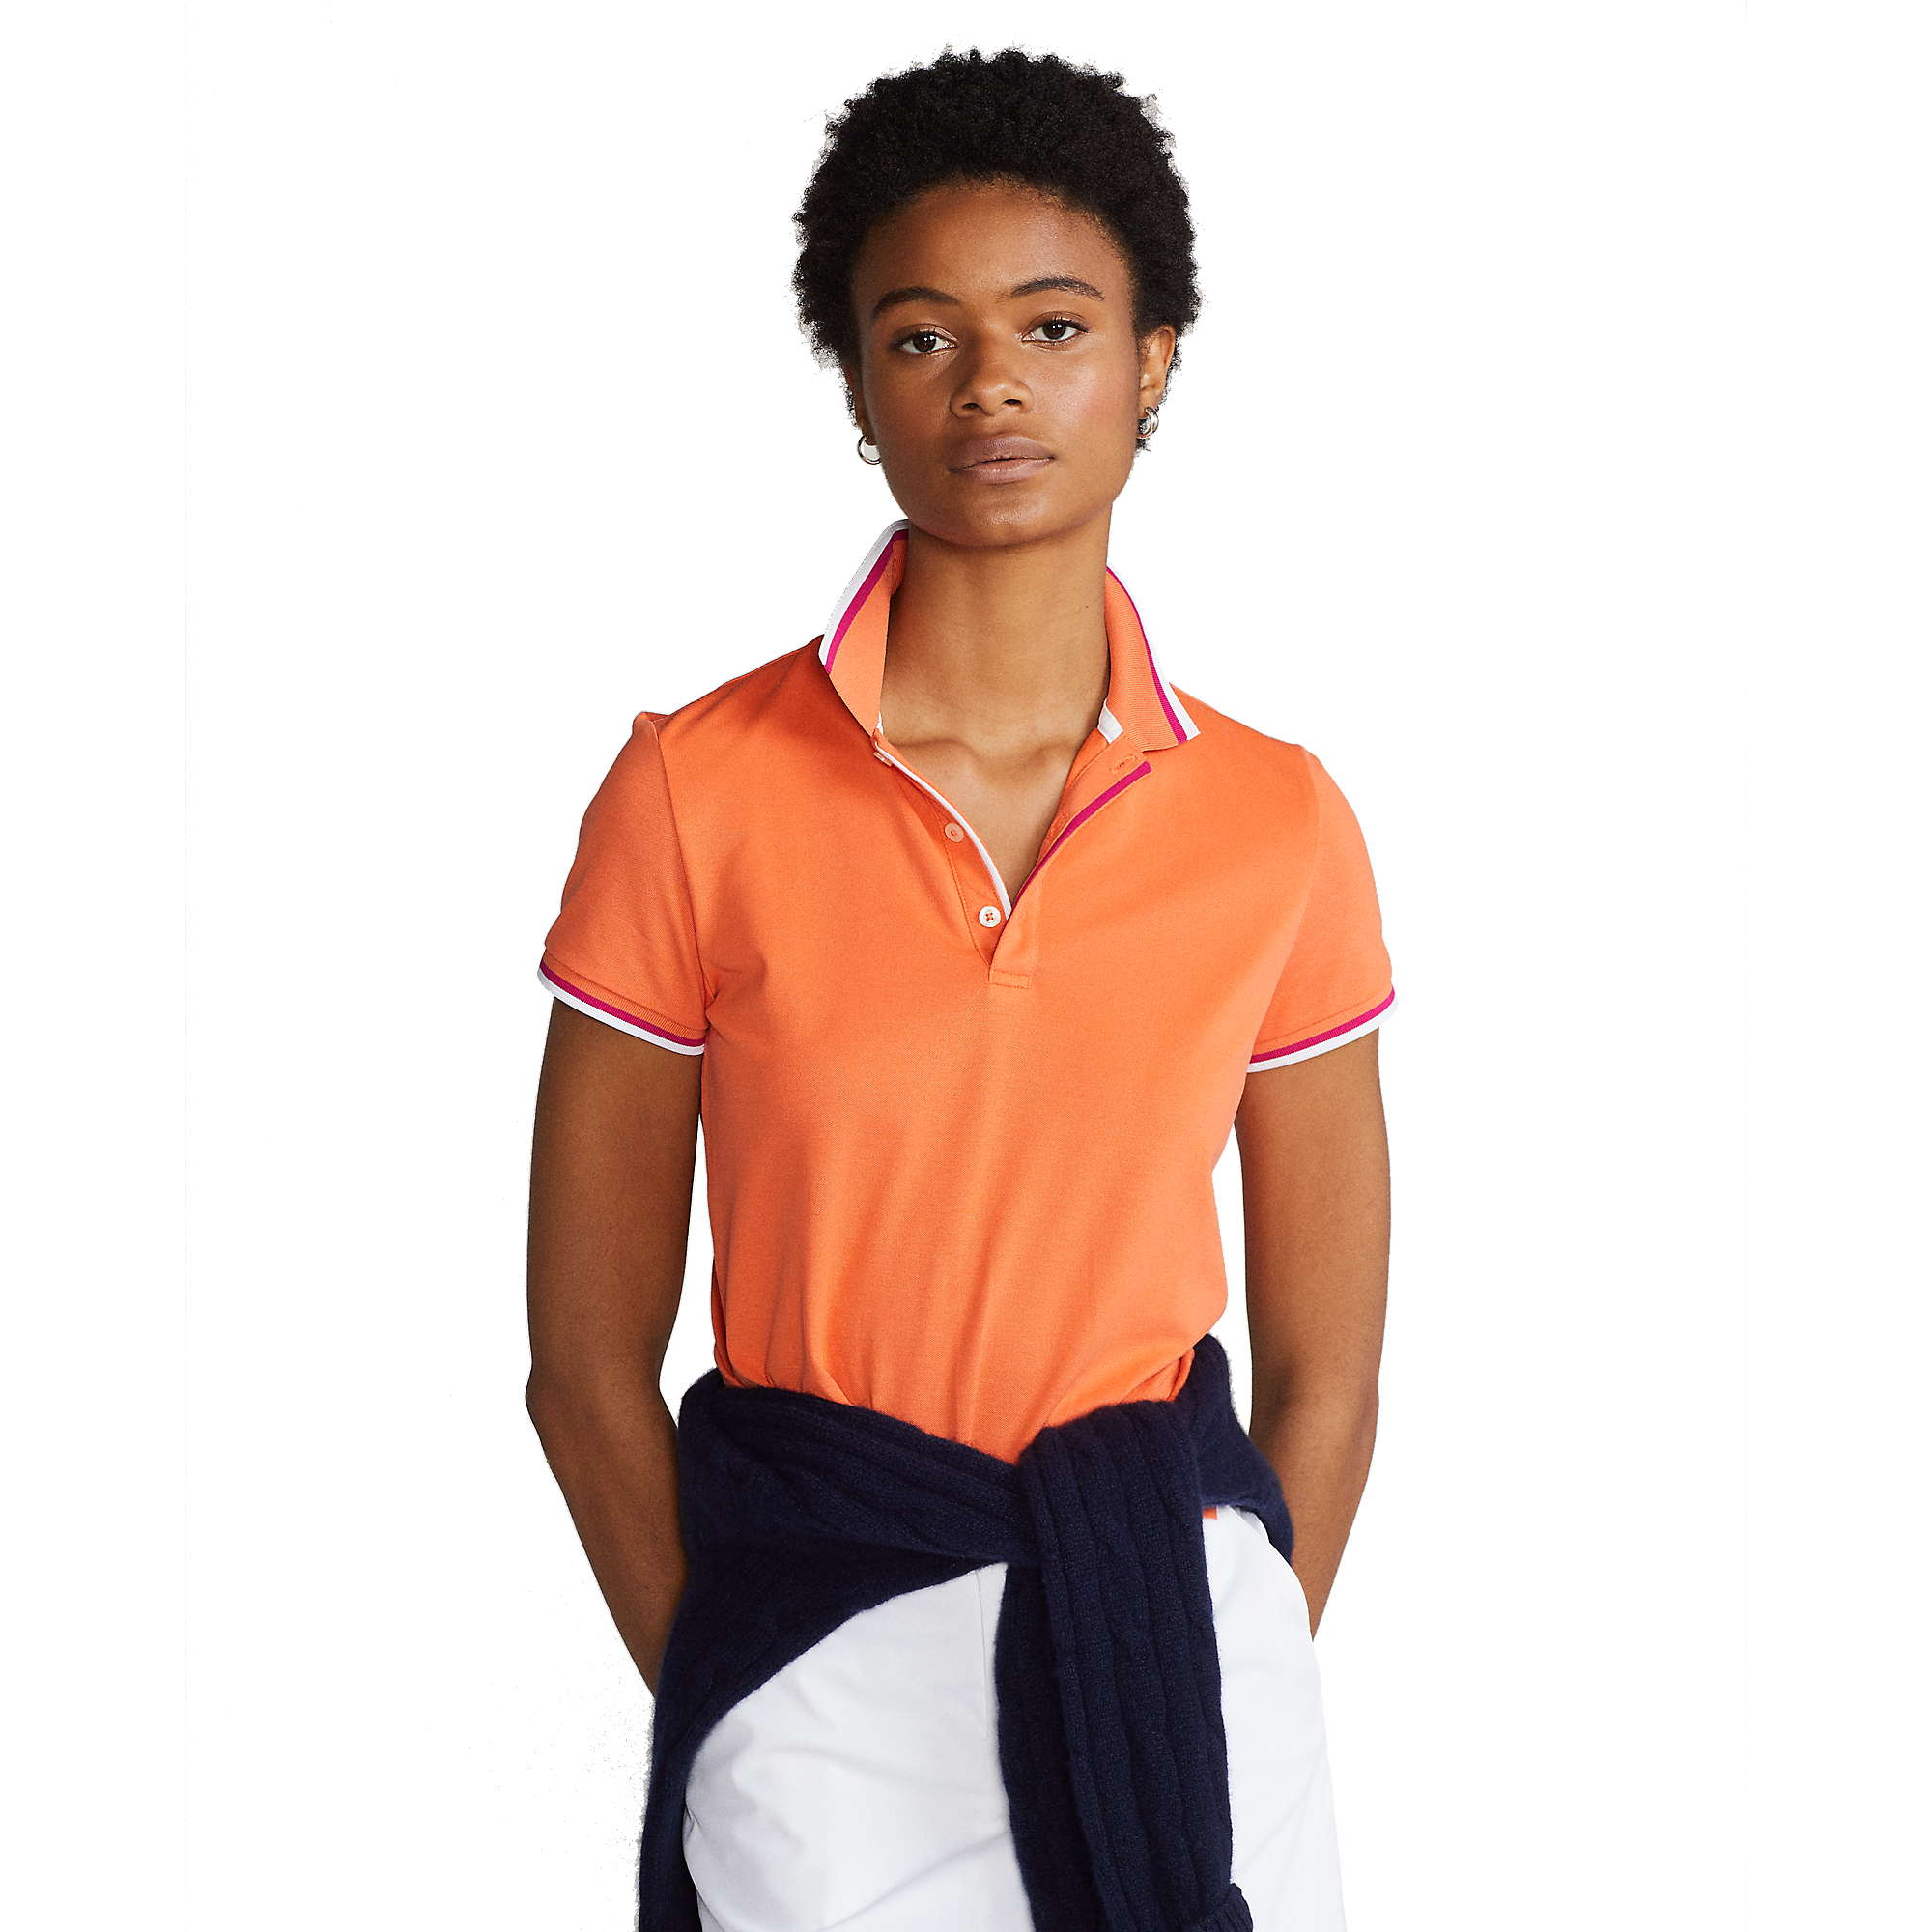 Can Polo Shirts Be Tailored? How Should A Polo Fit